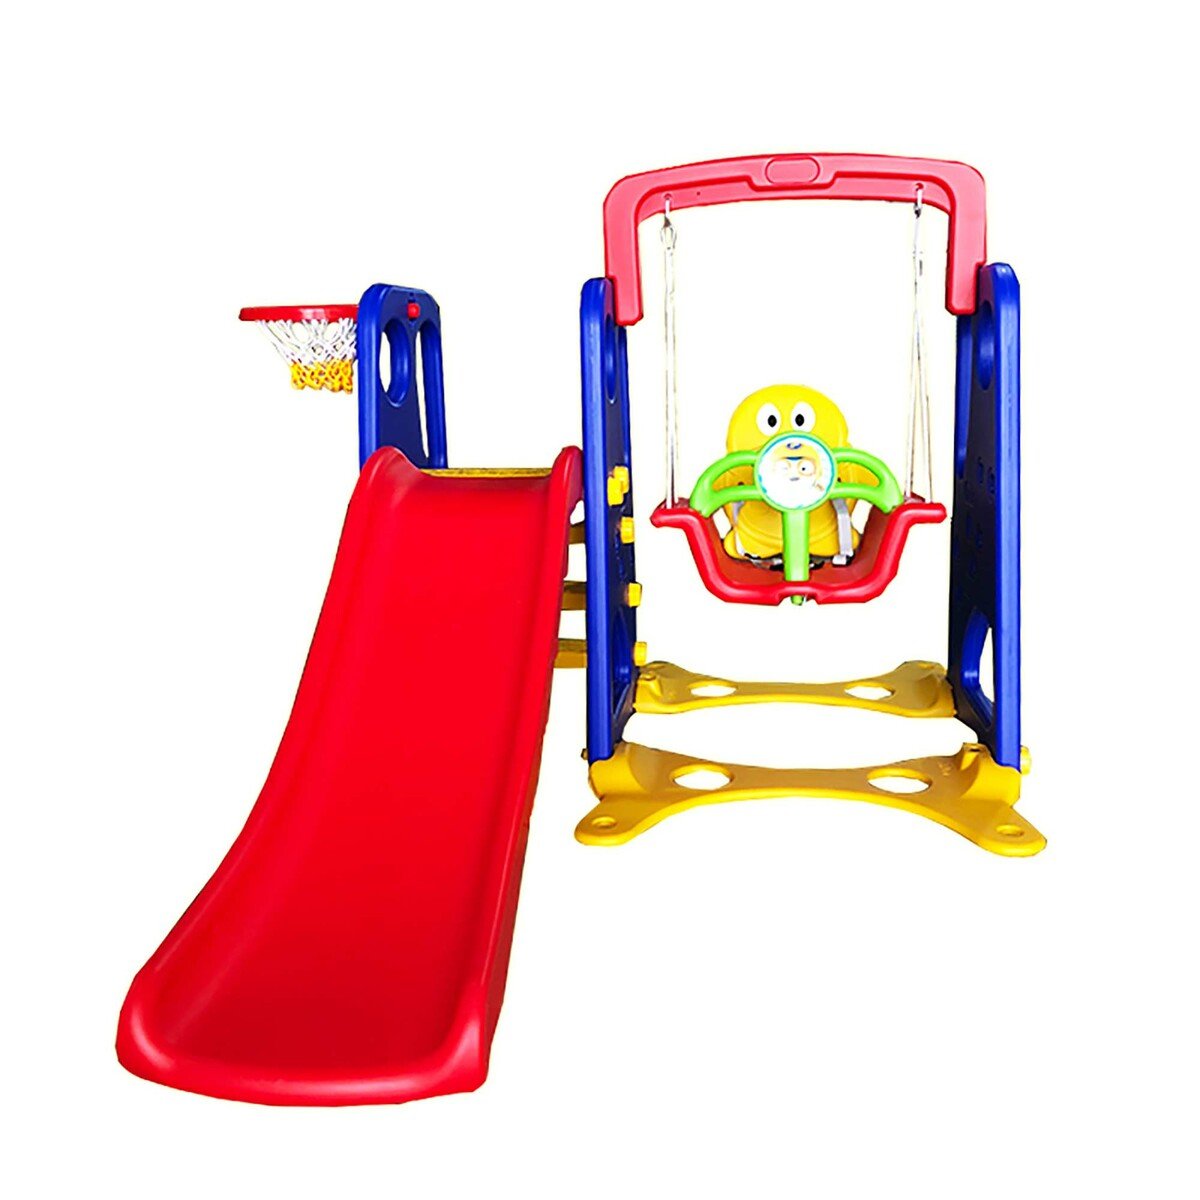 Little Angel Kids Toys Slide and Swing -L-DGN03-RED